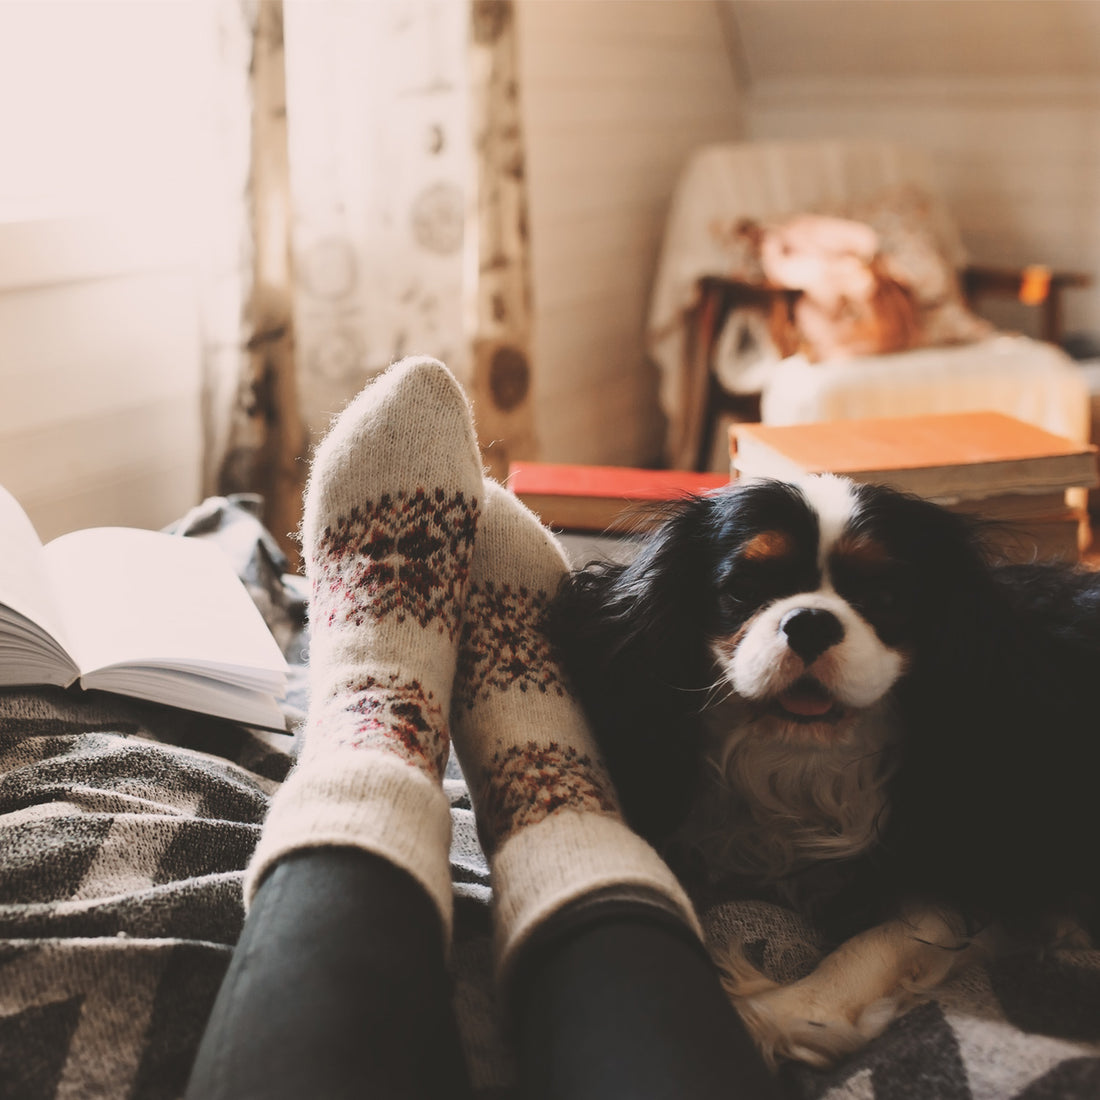 10 Indoor activities to do with your dog